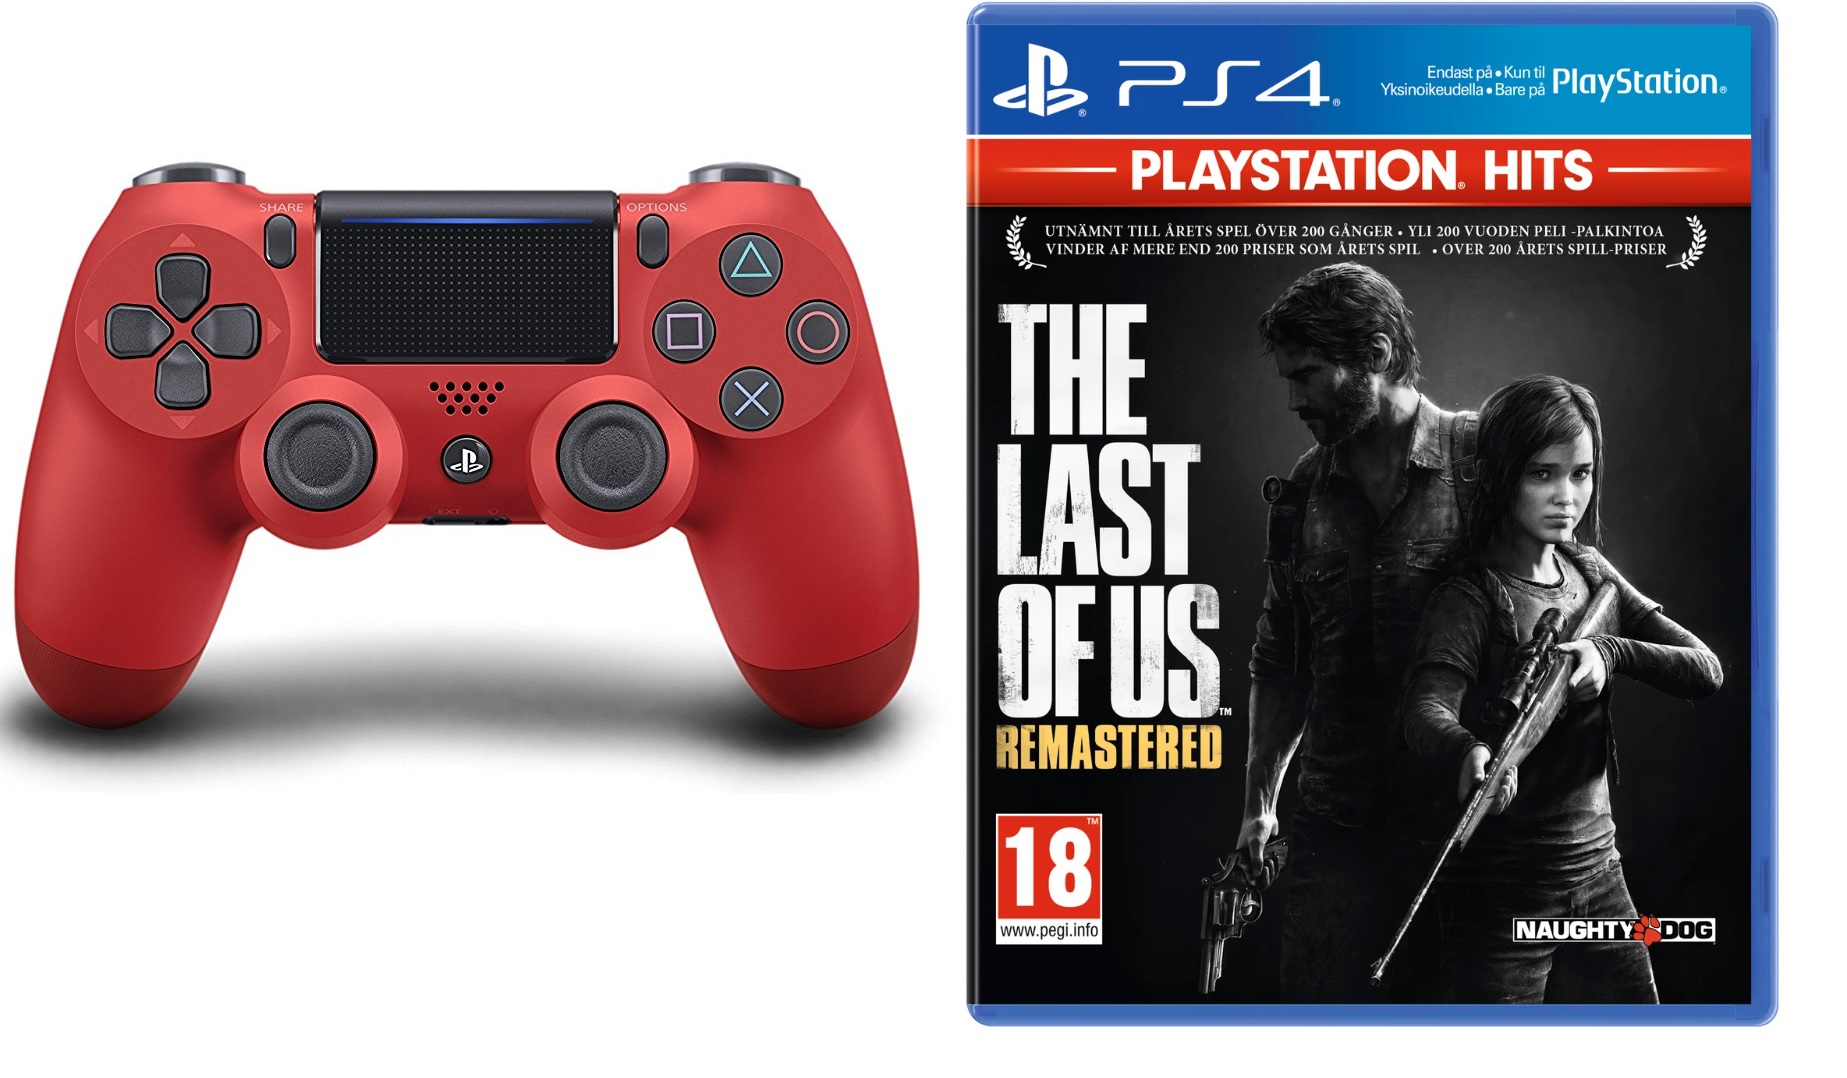 Sony Dualshock 4 Controller v2 - Red + The Last of Us - Remastered (Playstation Hits) (Nordic)